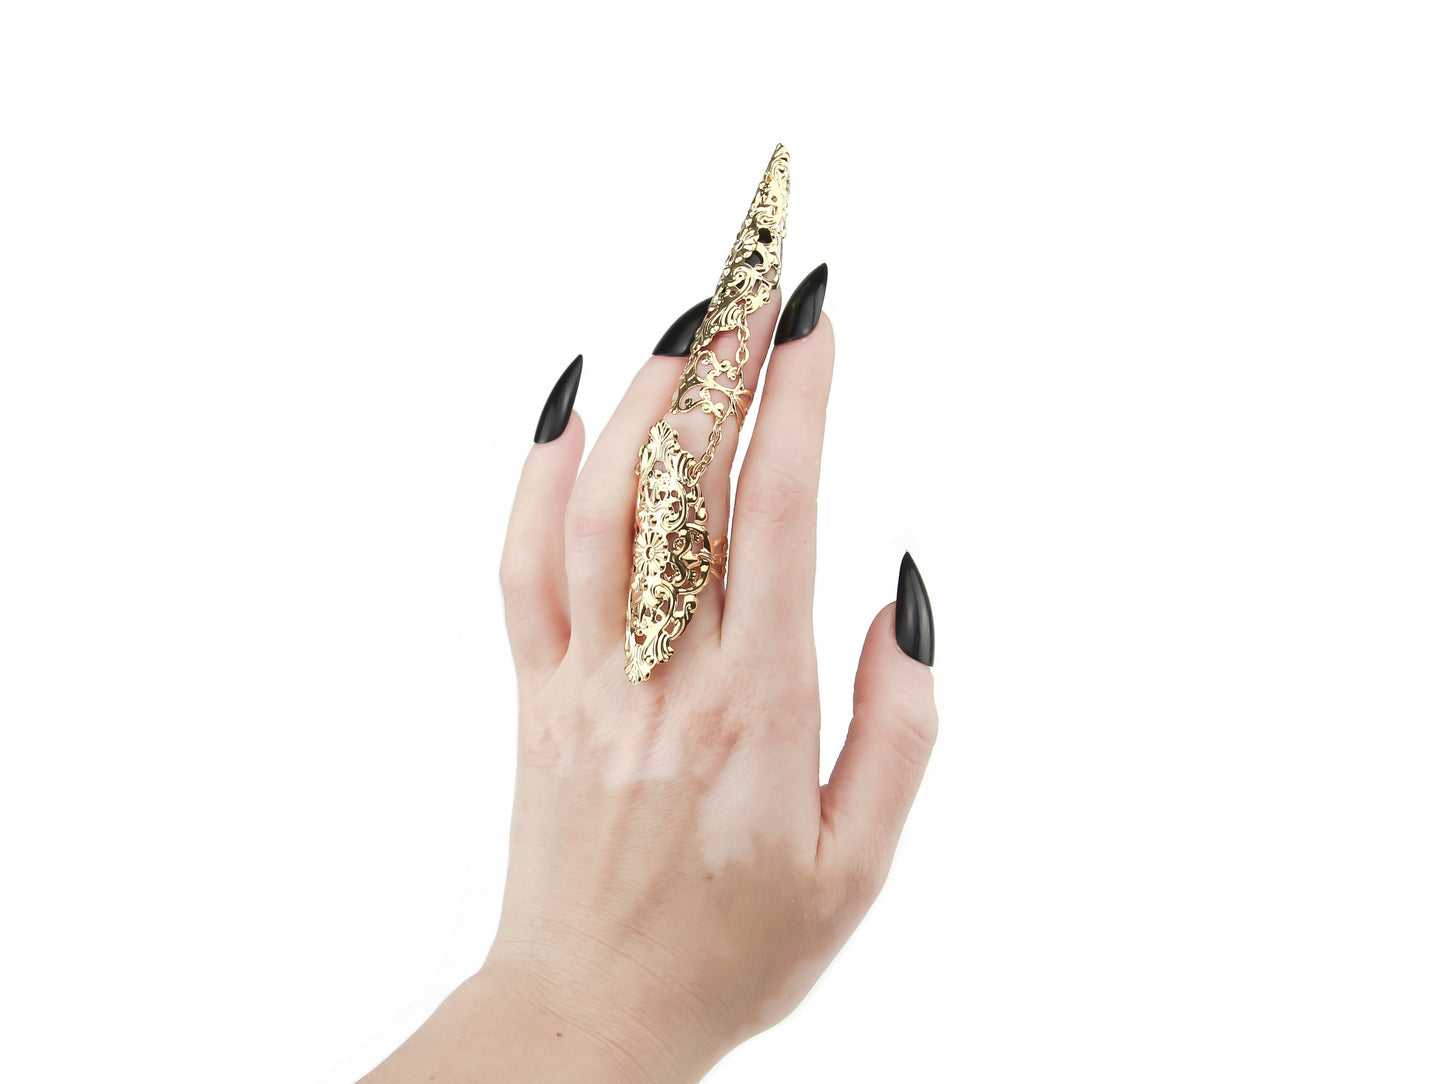 A hand adorned with Myril Jewels' gold full finger claw ring makes a bold statement in neo-goth style. The gold claw ring's intricate filigree spans the length of the middle finger, a dark-avantgarde accessory perfect for gothic and alternative fashion lovers. With its witchcore and whimsigoth appeal, this piece is ideal for Halloween, adding a dramatic touch to everyday wear or as a distinctive complement to rave party and festival outfits